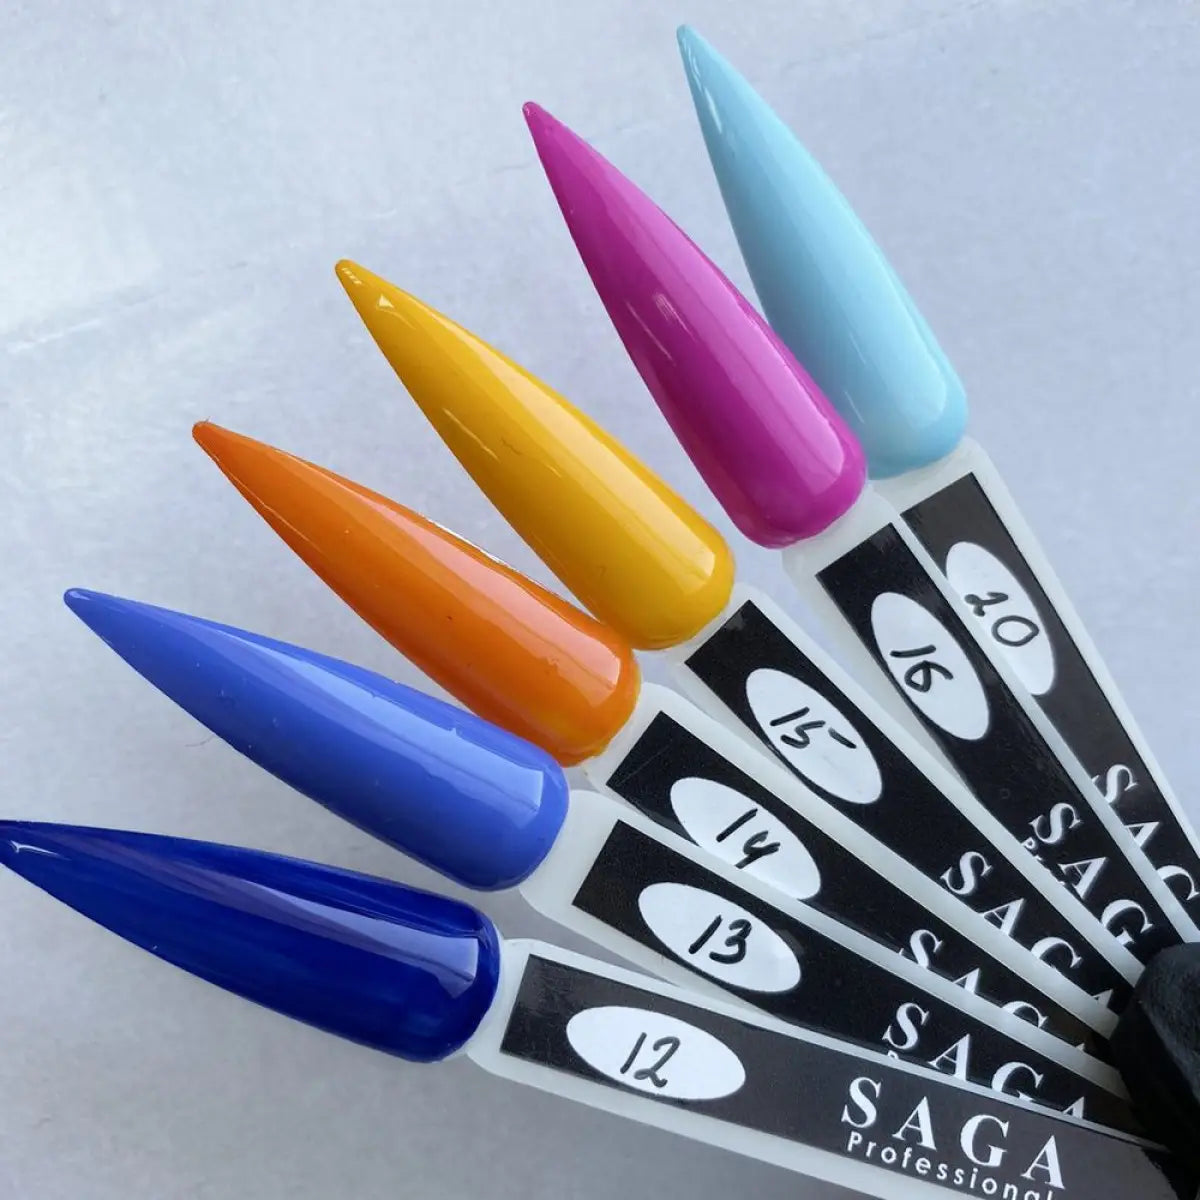 SAGA professional lacquer for stamping 12 (blue, enamel), 8 ml